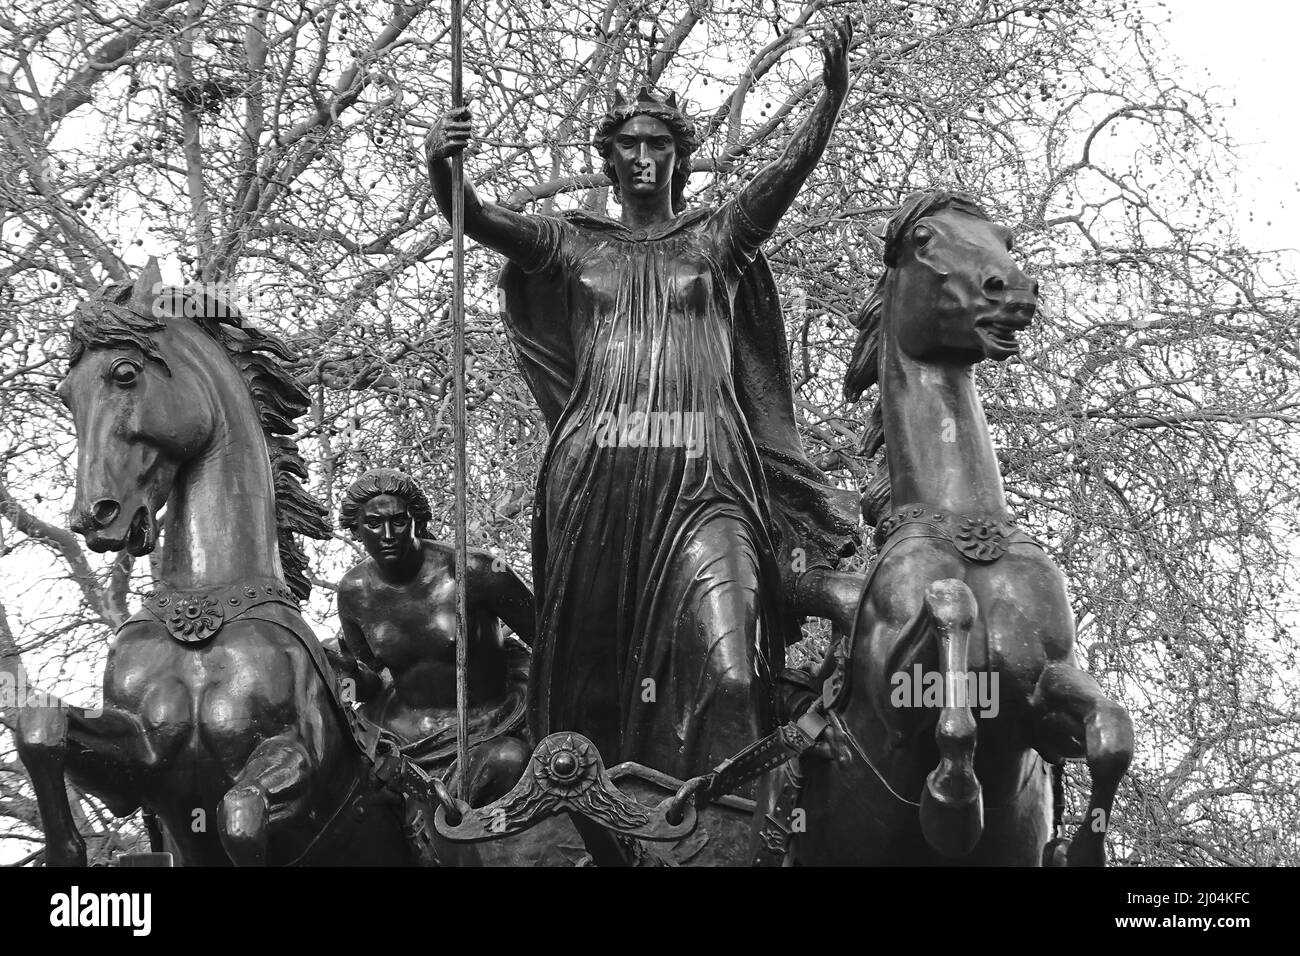 Westminster, London, 2022. Boadicea and Her Daughters is a bronze sculpture in London representing Boudica, queen of the Celtic Iceni tribe. Stock Photo